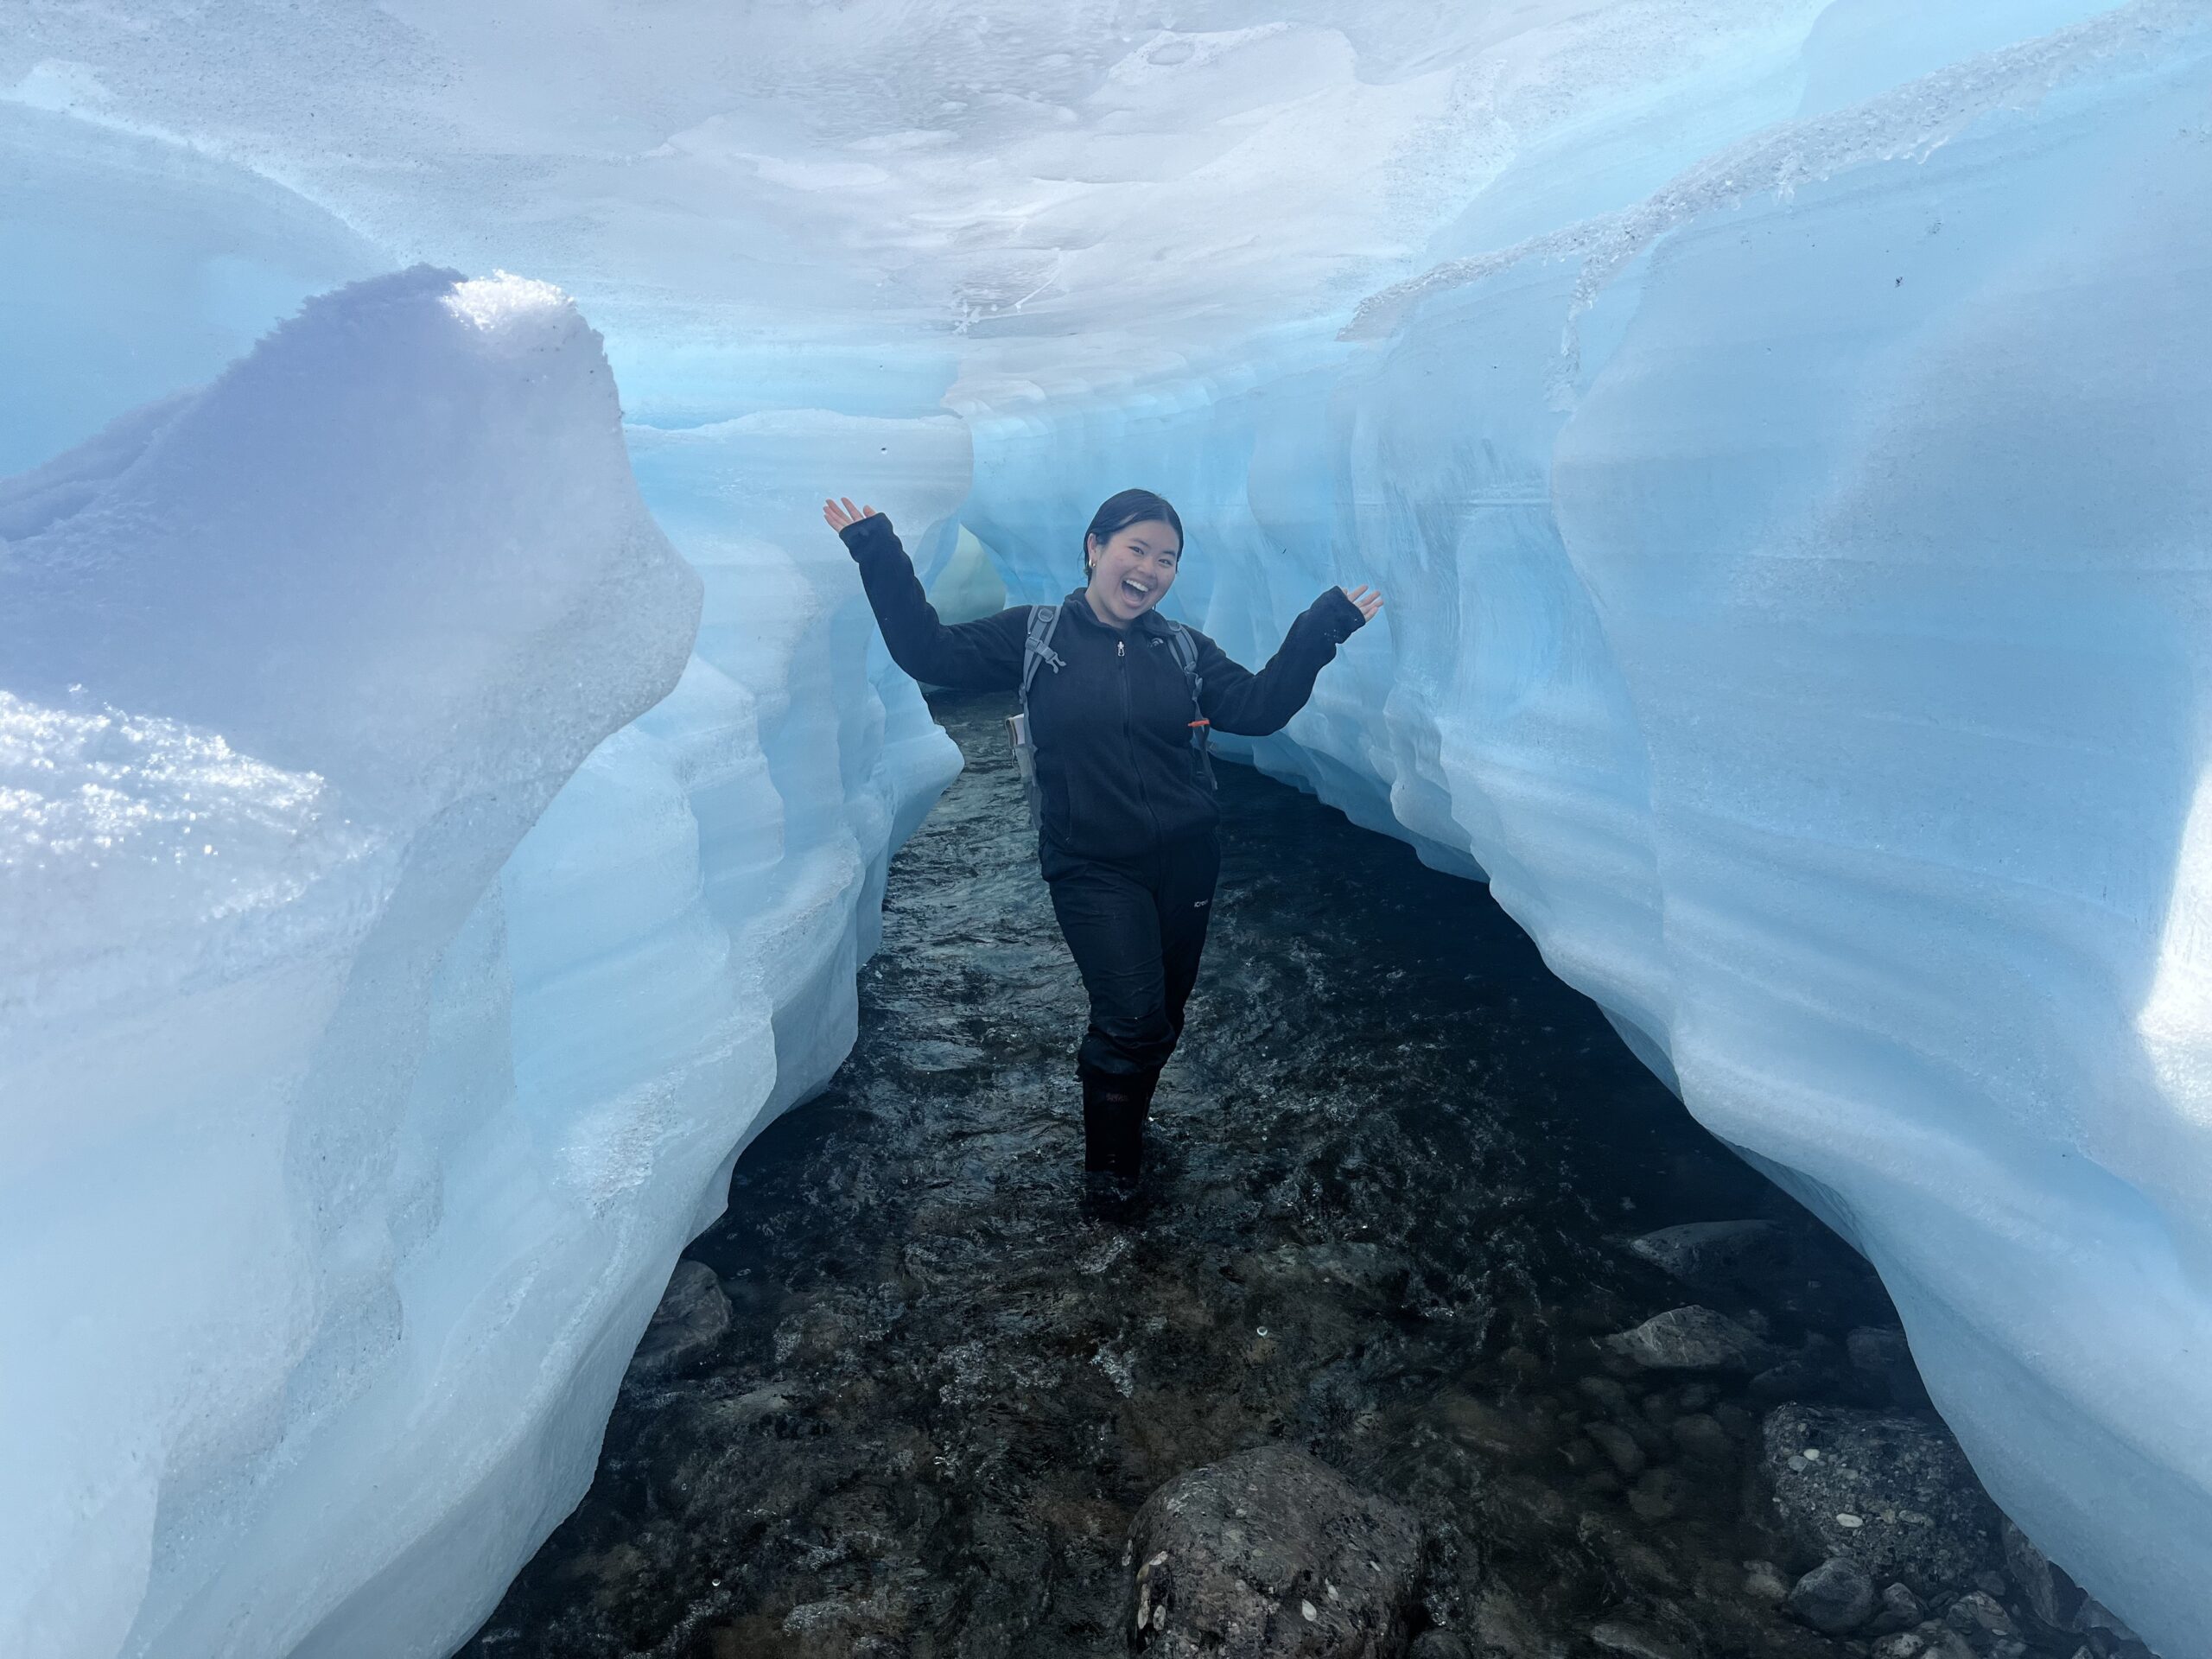 a person stands with their arms up cheerfully in the middle of an icy cavern